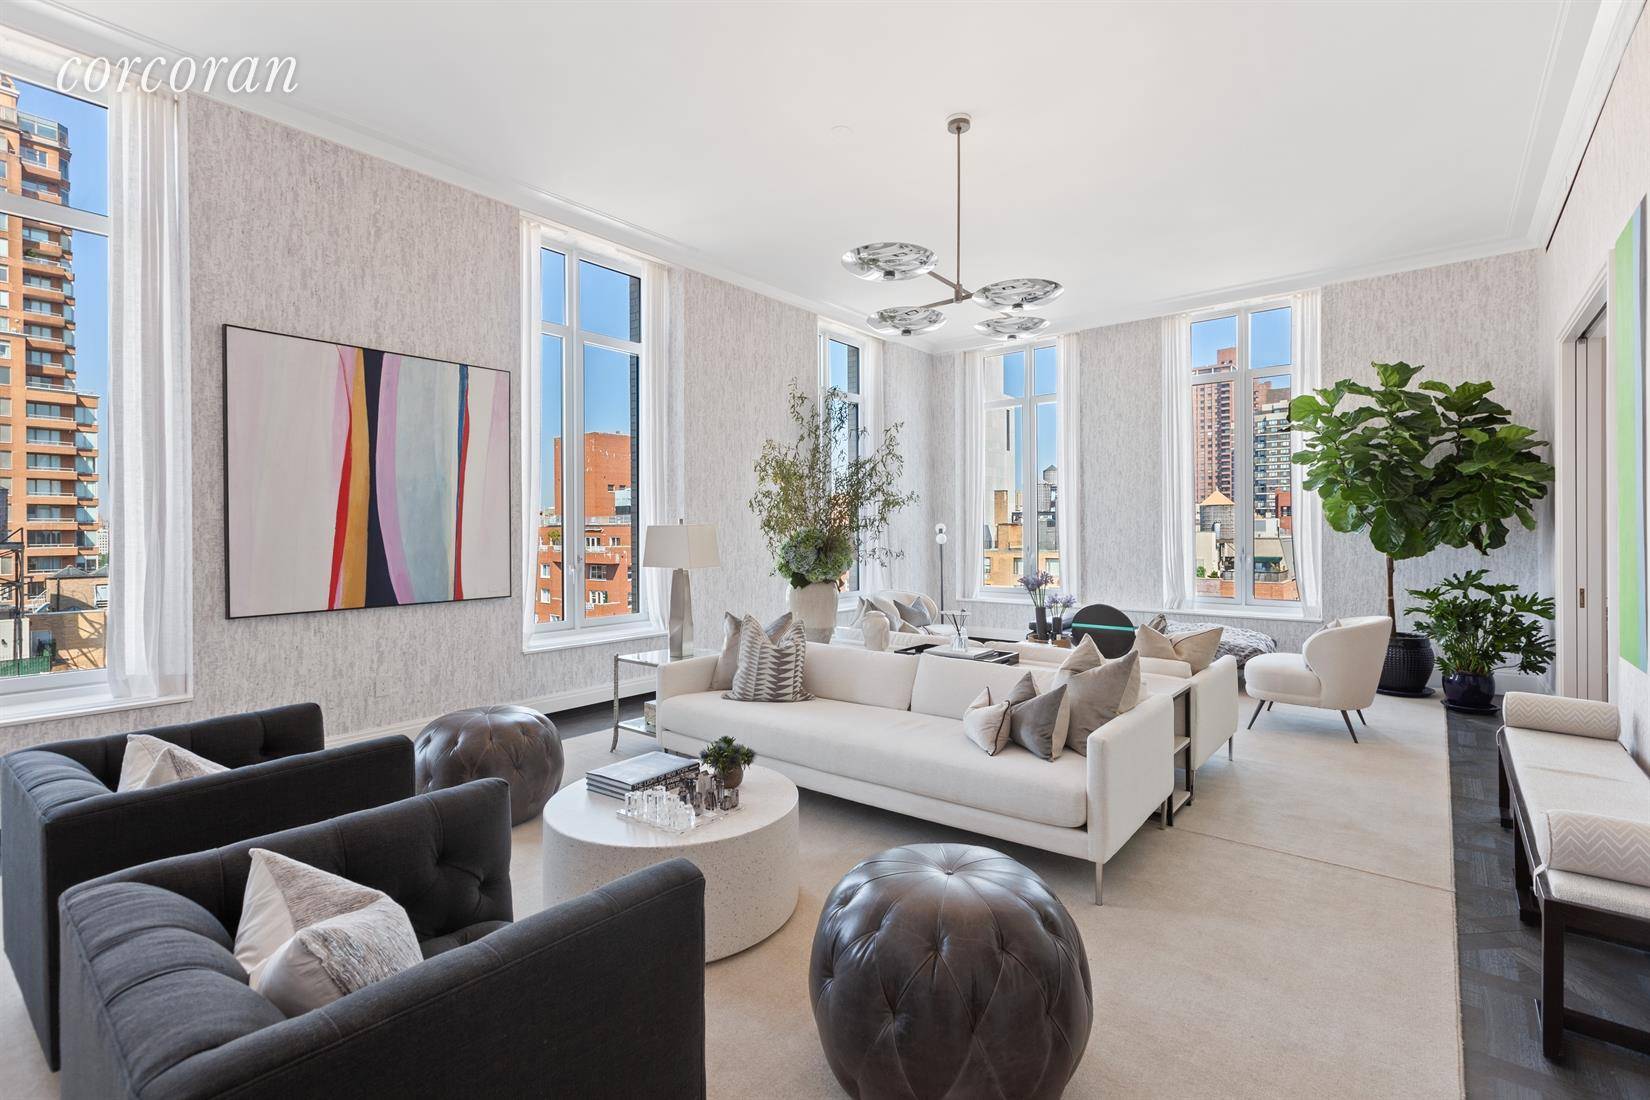 1010 Park Avenue, Penthouse Duplex is a rare jewel offering grand scale and sophisticated modern luxury.